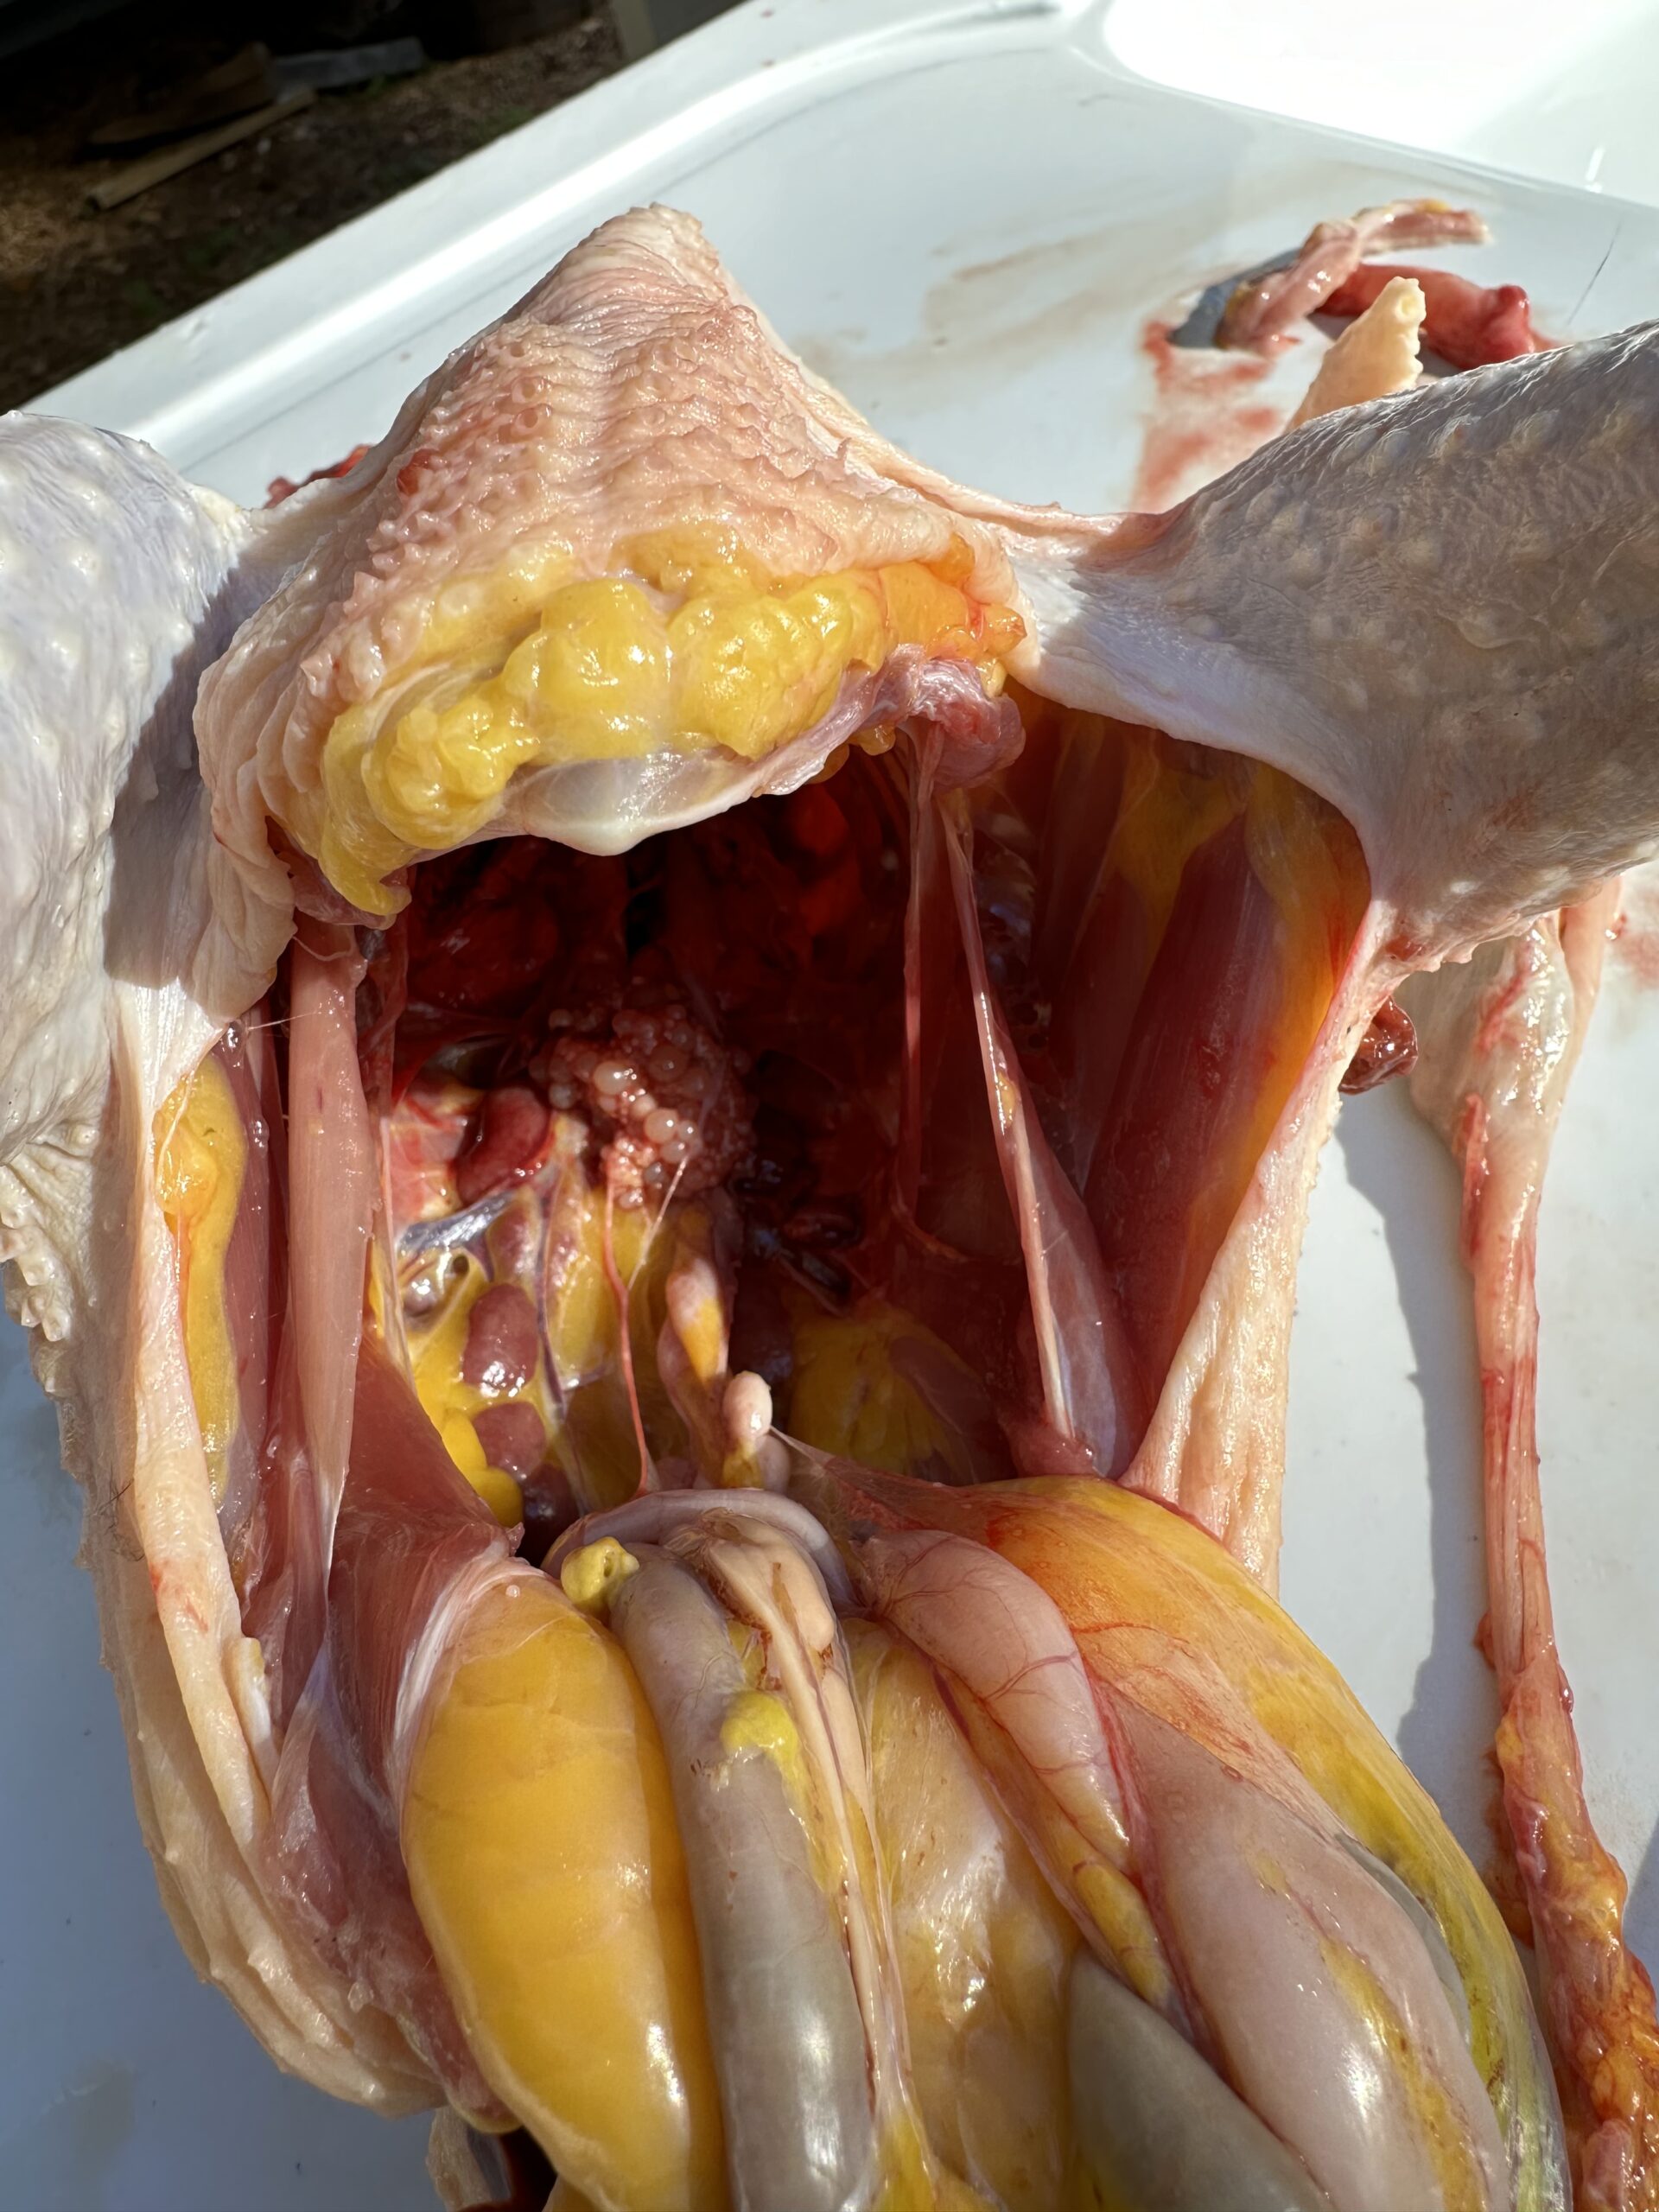 We had a few non-Leghorn hens with diseased lungs.